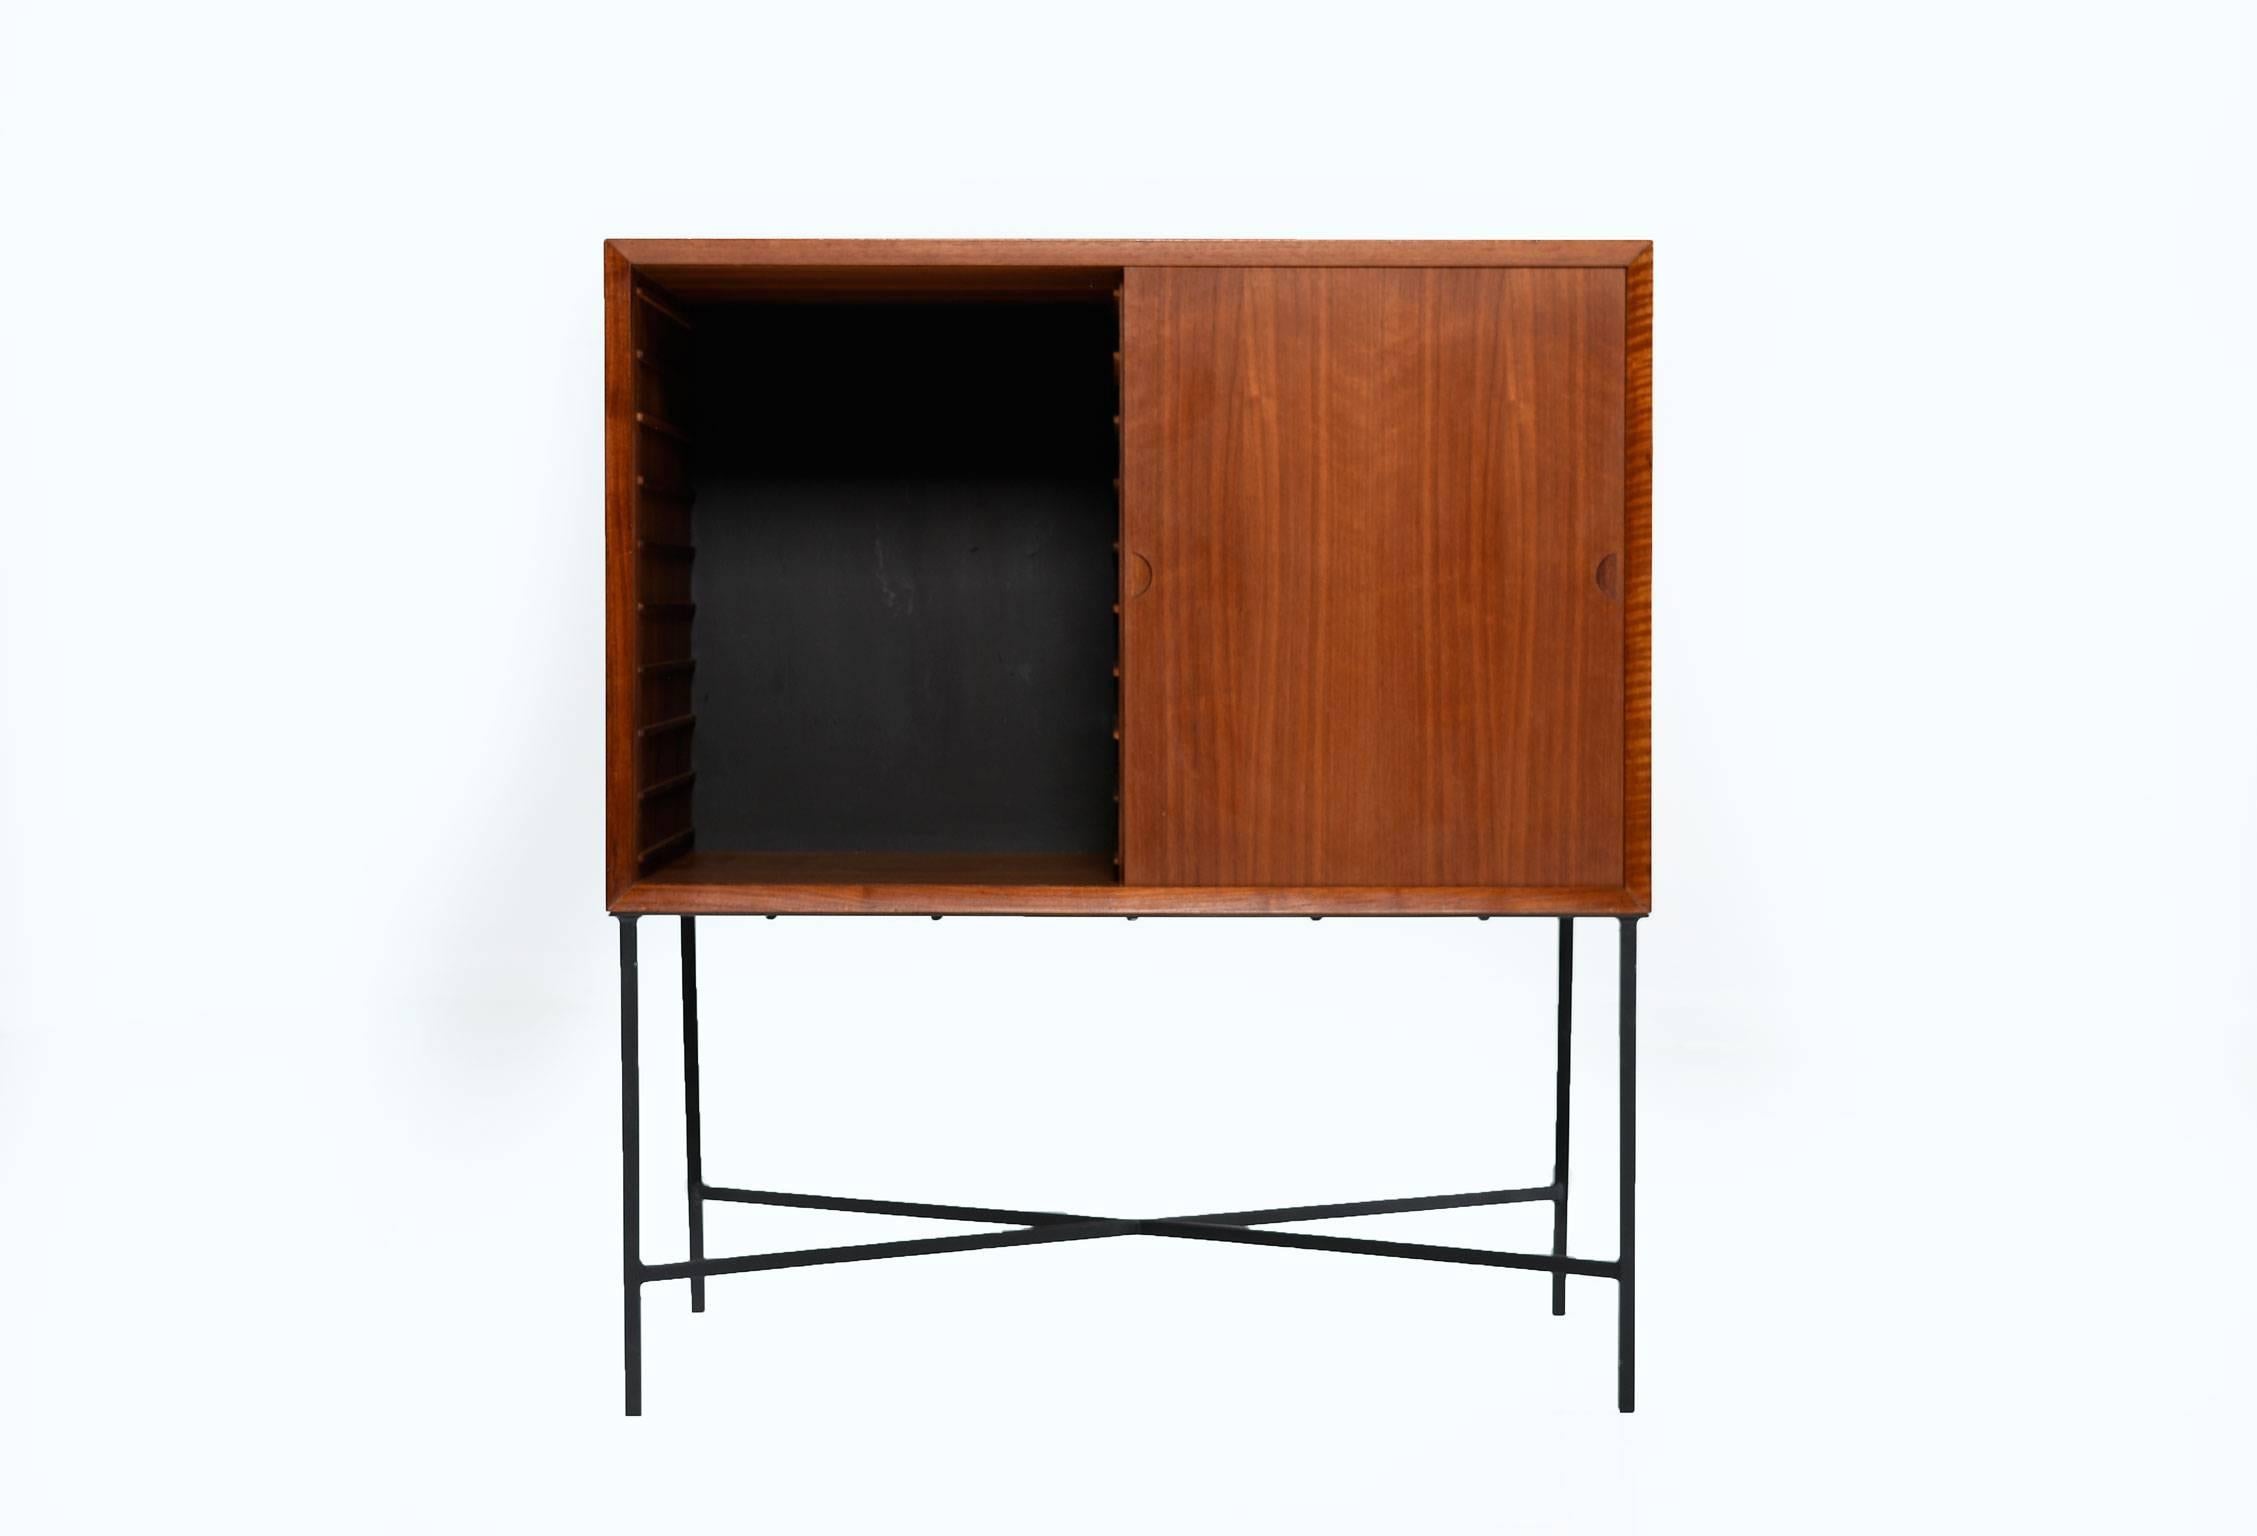 Sleek Mid-Century Modern teak record cabinet mounted on a custom-made, welded, wrought iron base. This teak record cabinet features sliding doors with Classic Danish modern half moon recessed pulls, opening to reveal two large open storage cabinets.